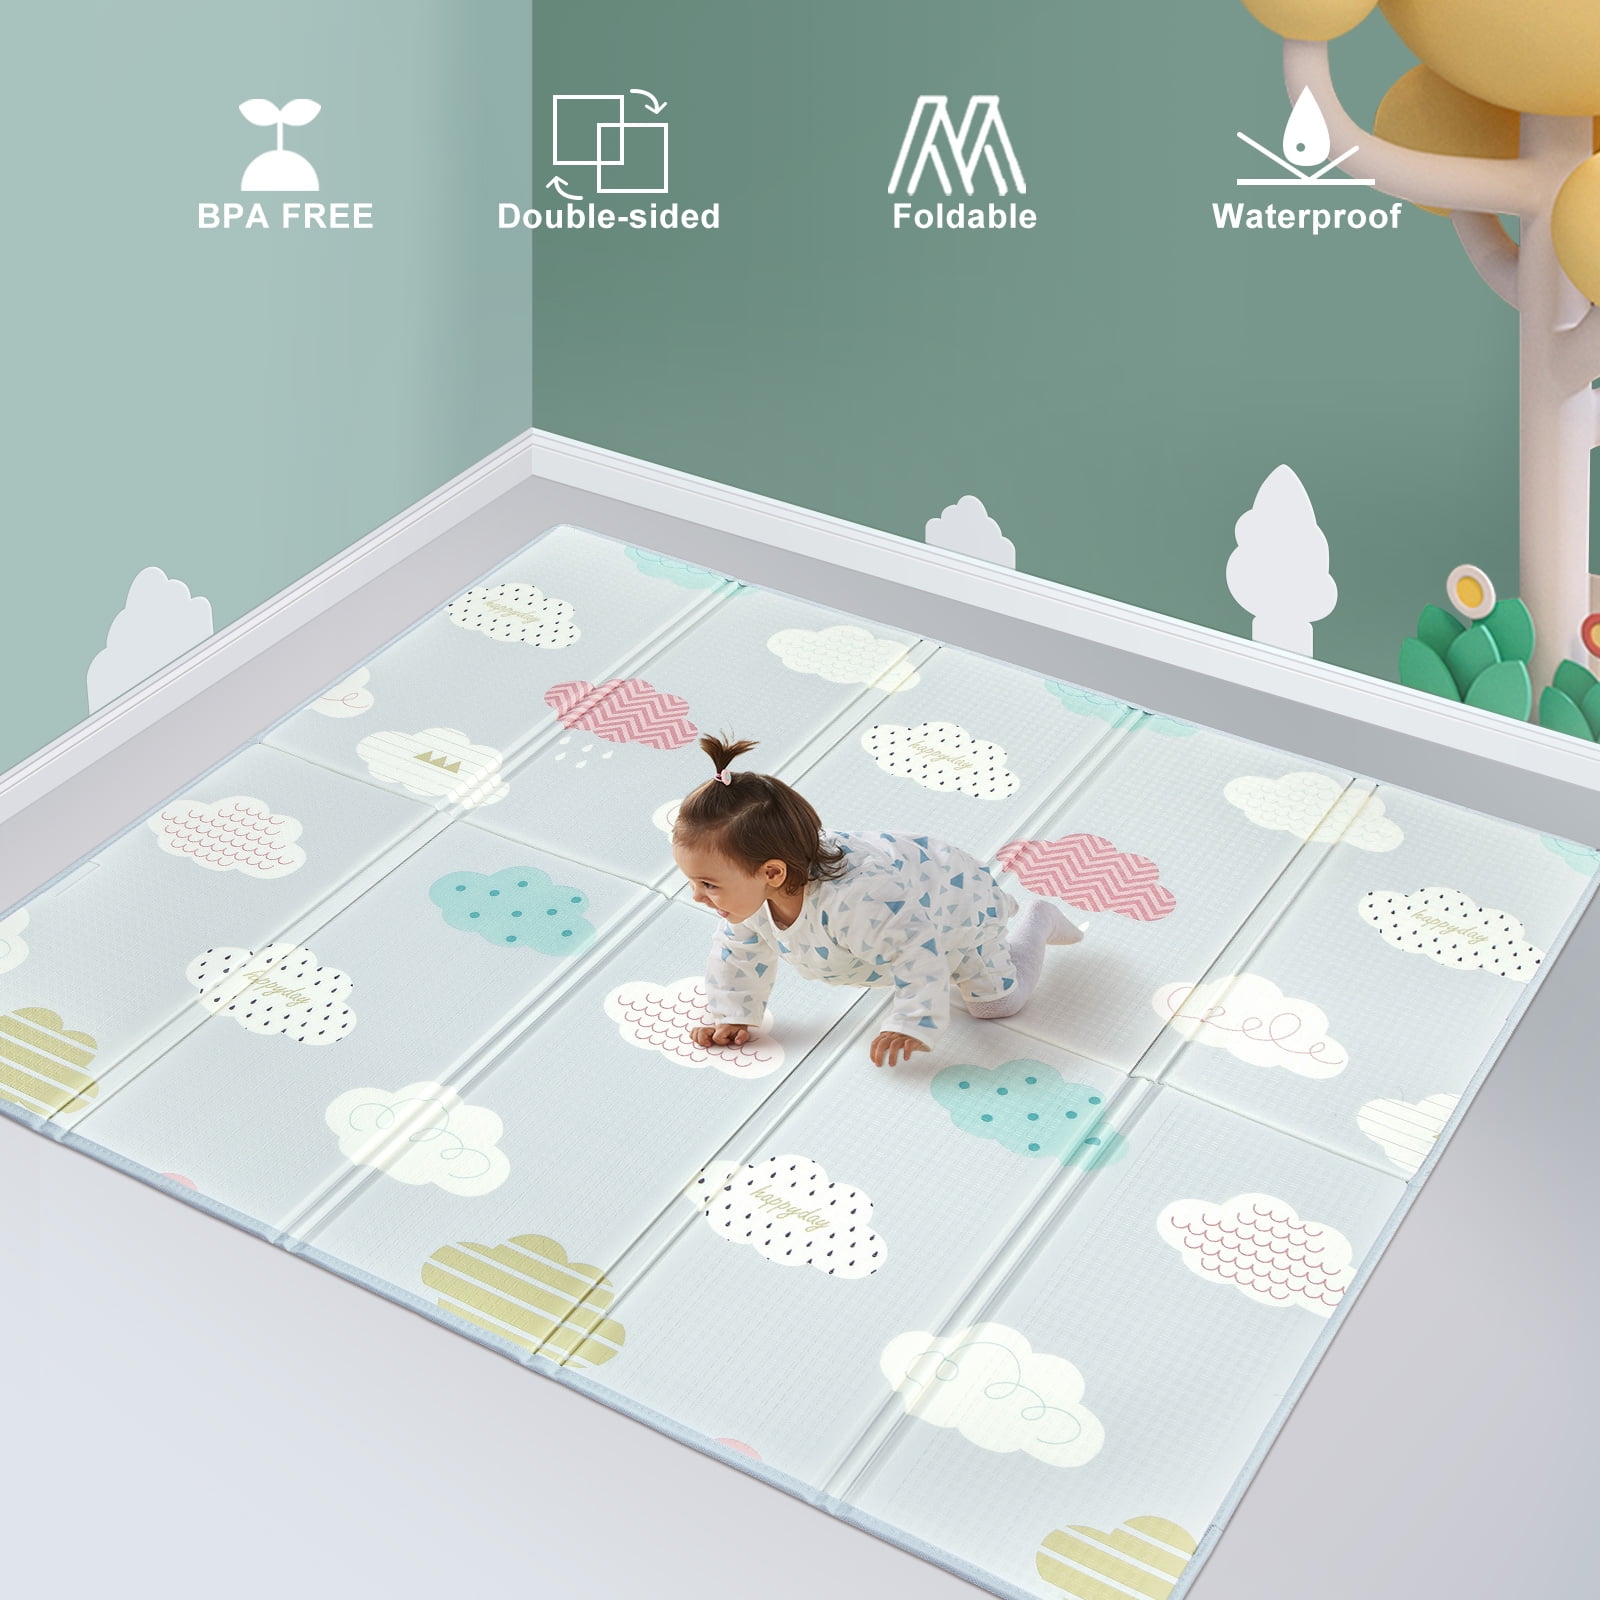 Uanlauo Baby Play Mat Foam Playmat Extra Large Thick Crawling Playmats for sale online 